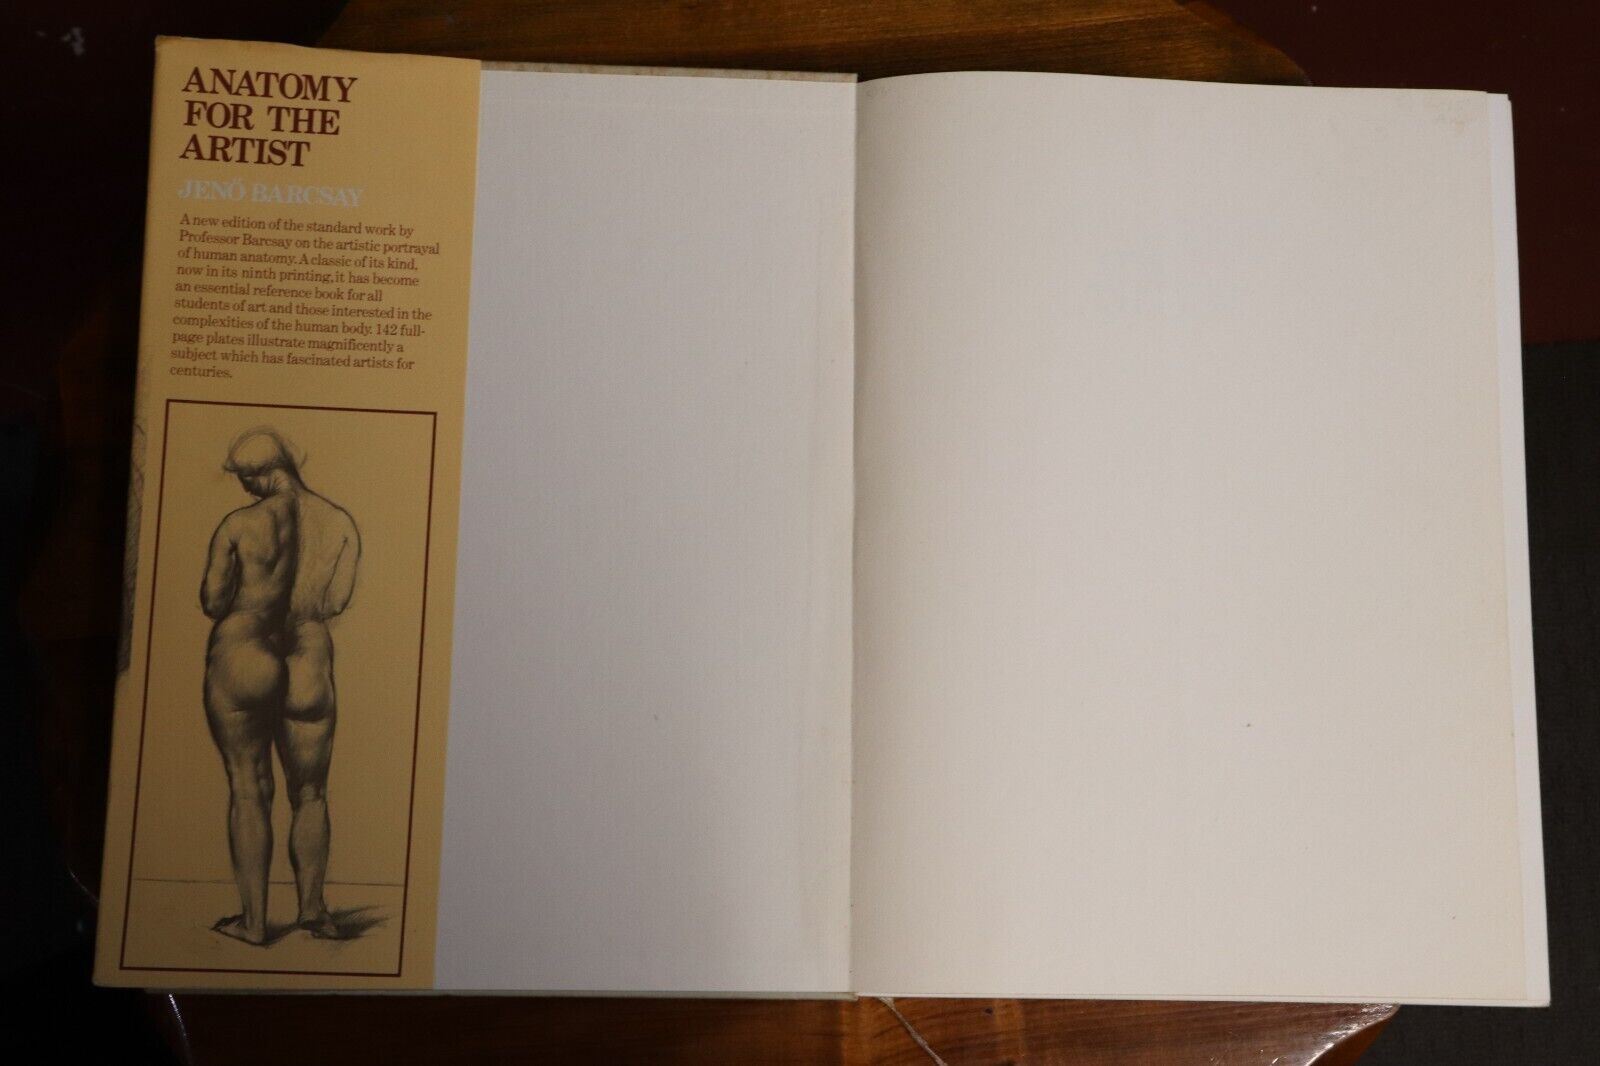 Anatomy For The Artist by Jeno Barcsay - 1973 - Vintage Art Tutorial Book